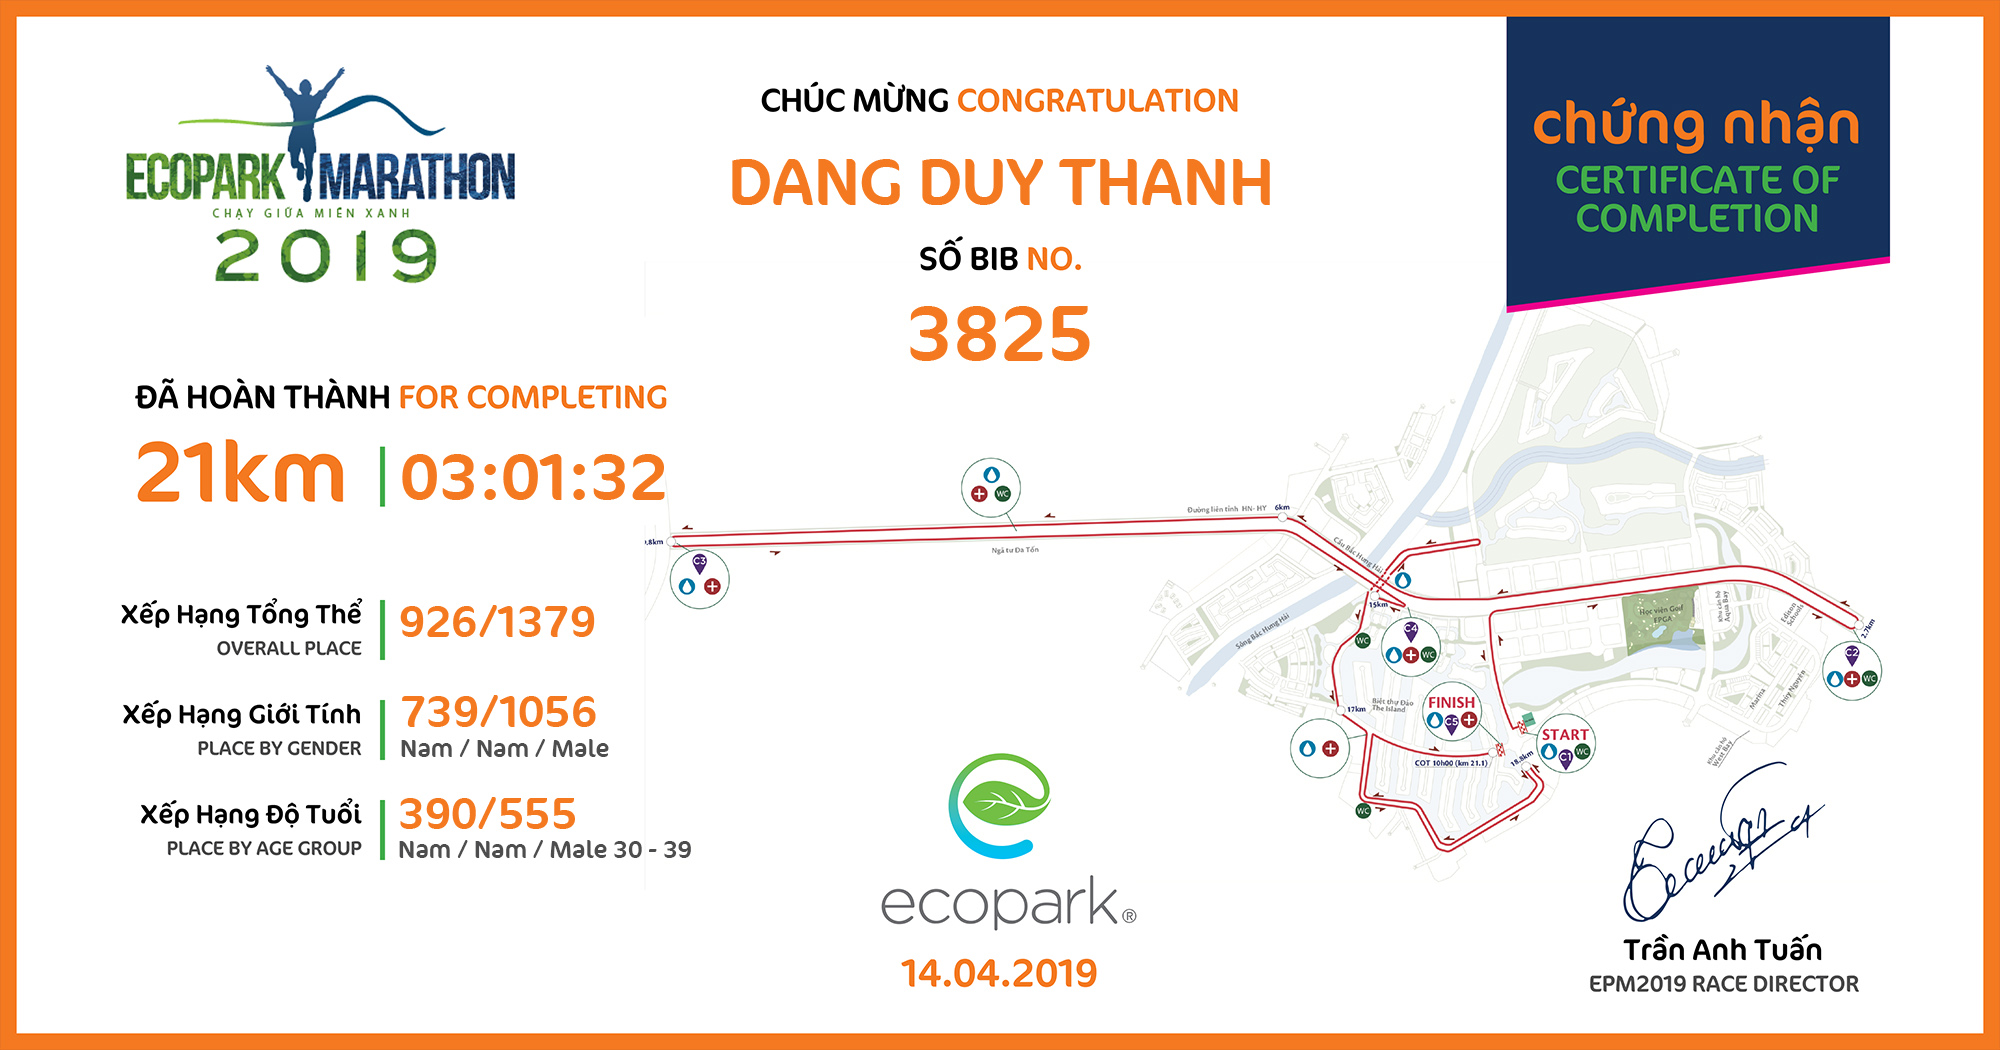 3825 - Dang Duy Thanh